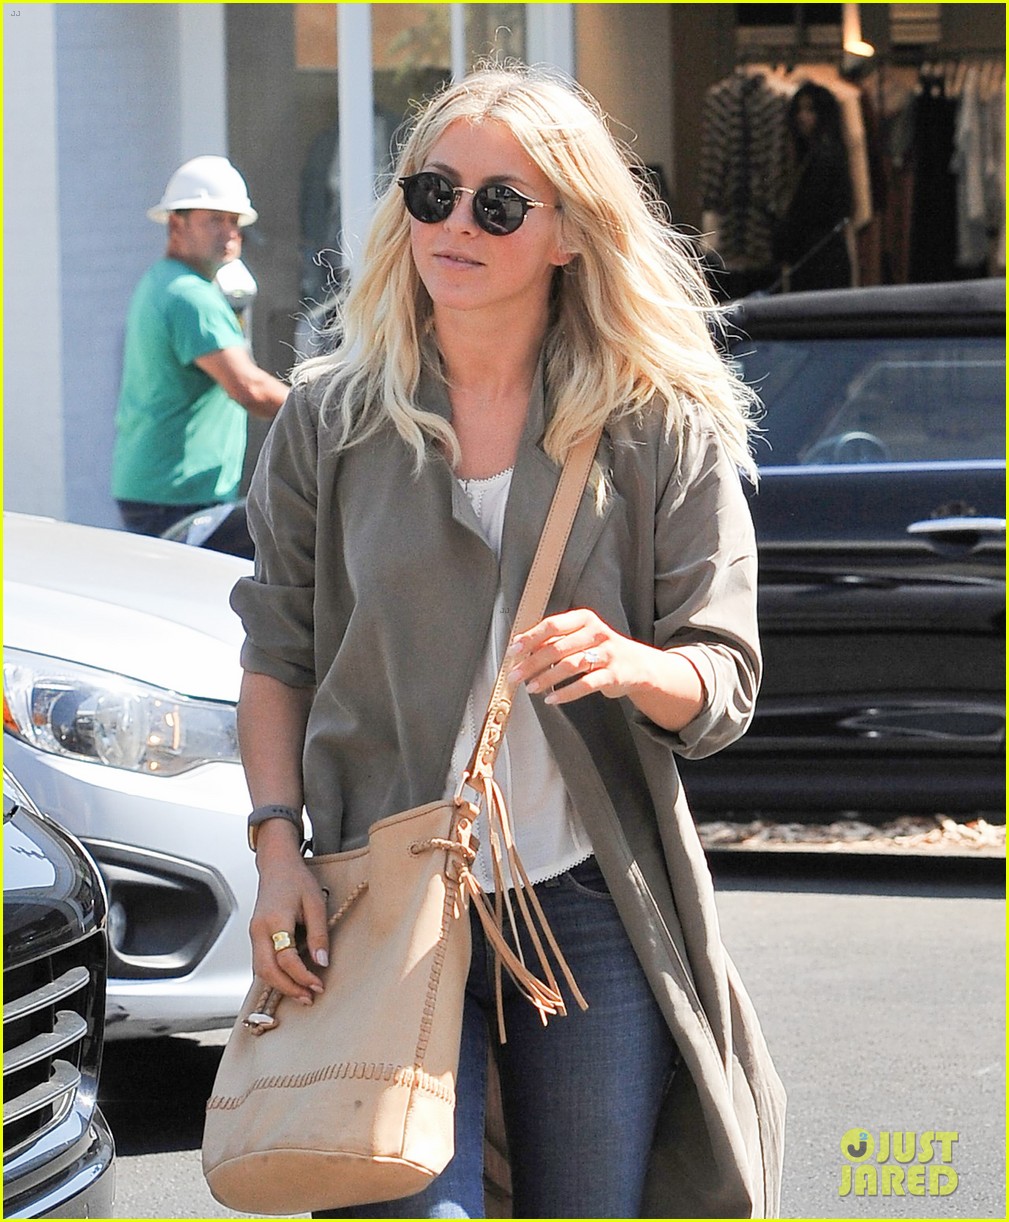 julianne hough enjoys her afternoon shopping20116mytext